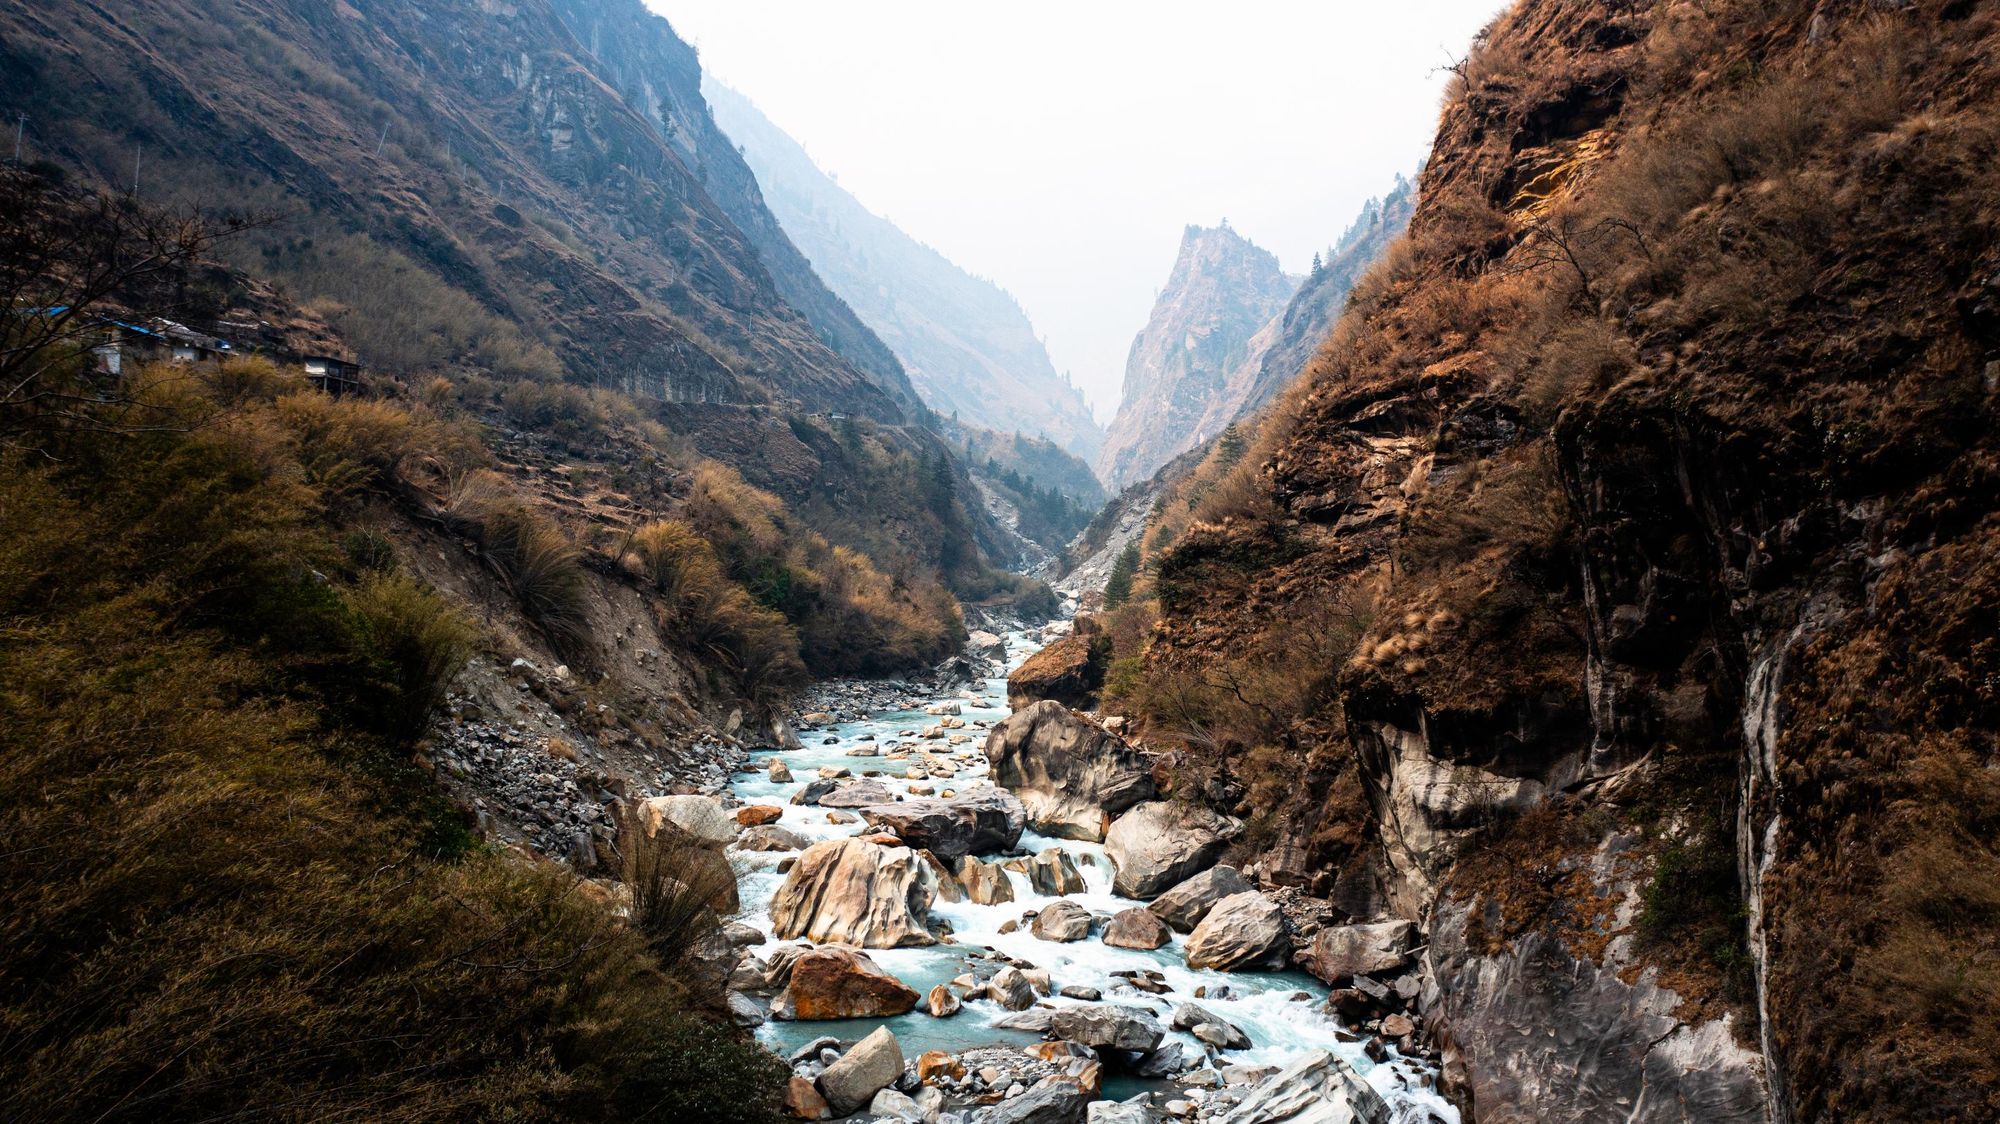 The remarkable scenery of the Marshyangdi river, which flows along an early stretch of the Annapurna Circuit. Photo: Josh Edwards